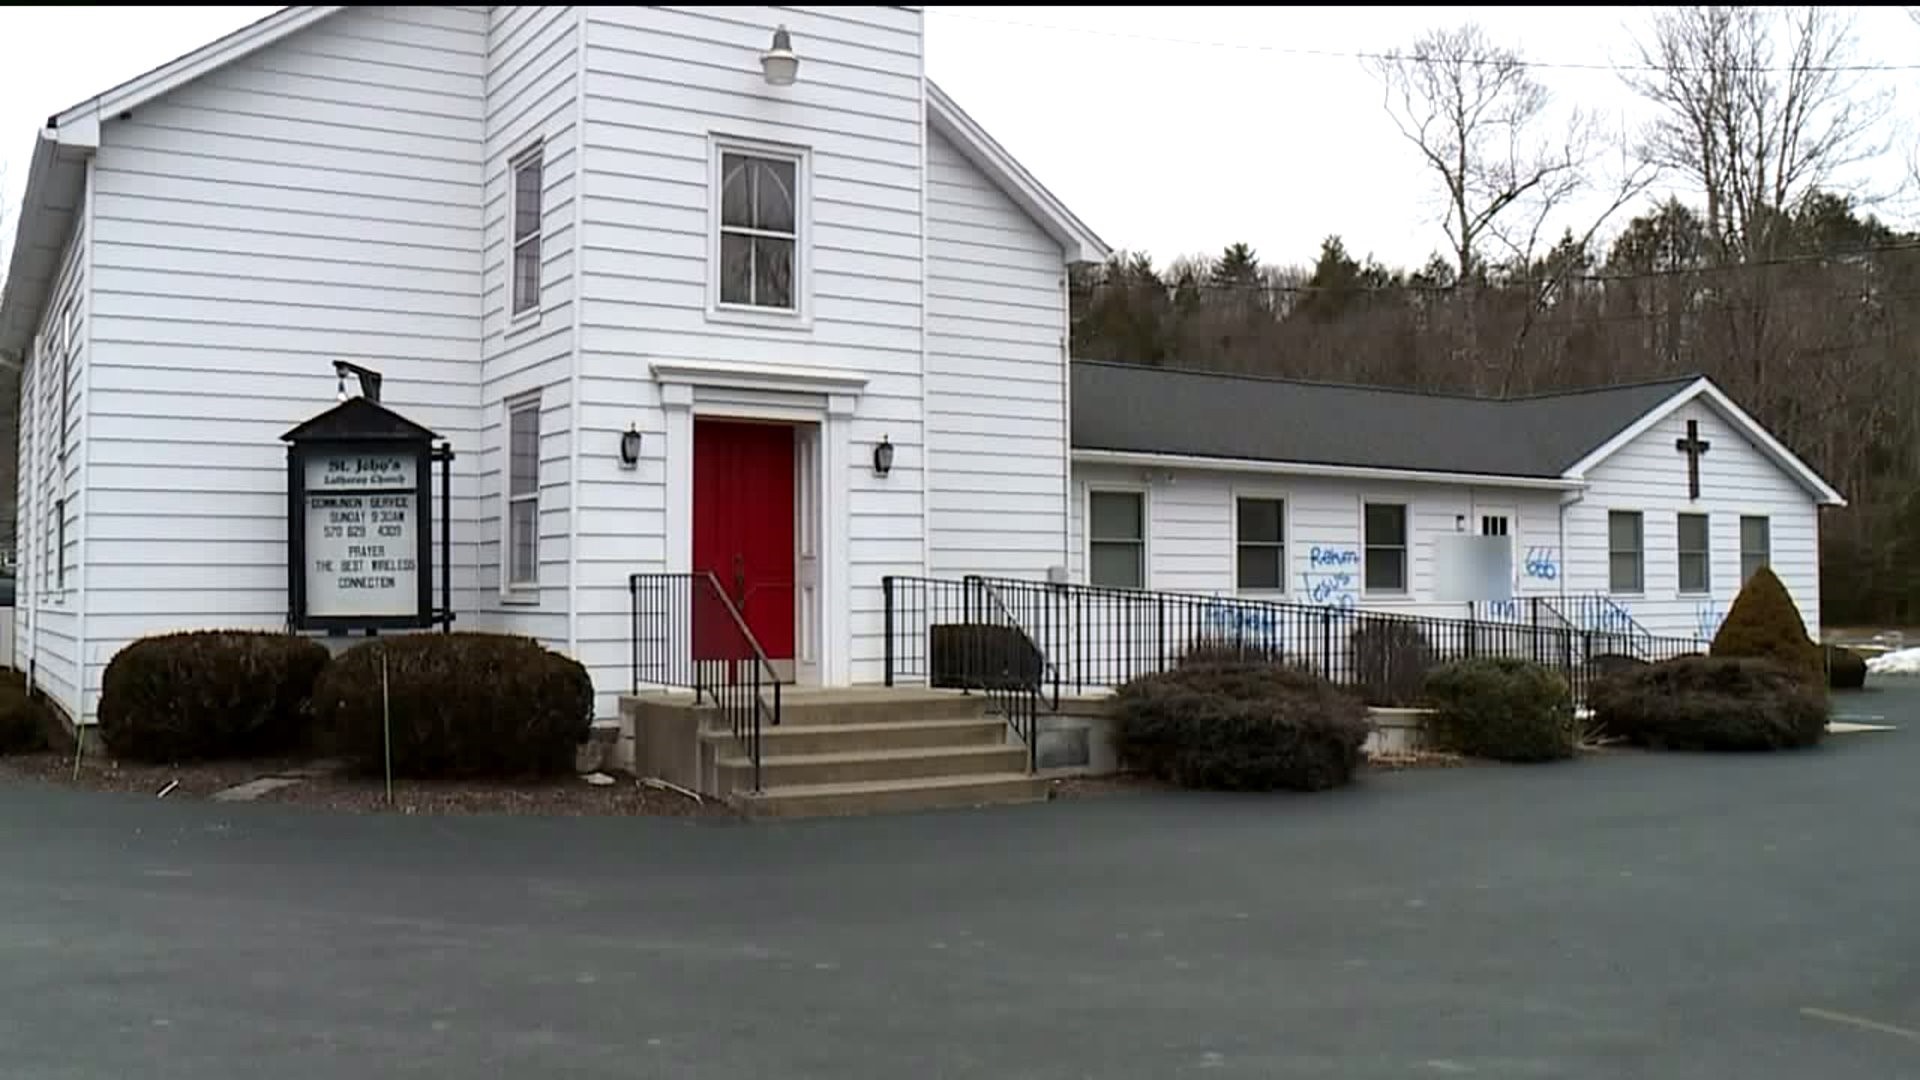 Hateful Words Painted on Church in the Poconos